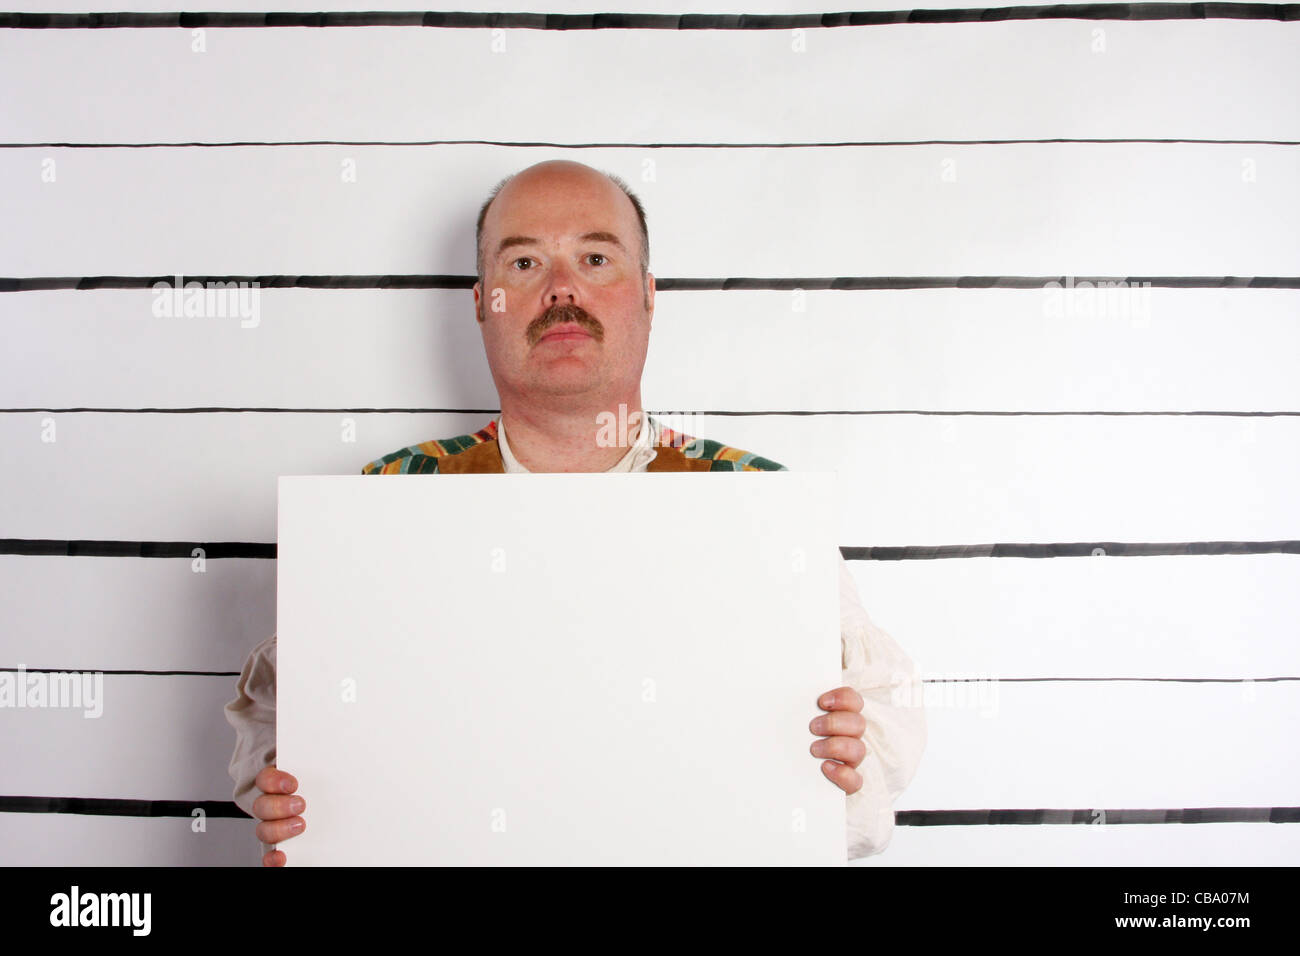 A prisoner holding a sign for a booking mugshot Stock Photo